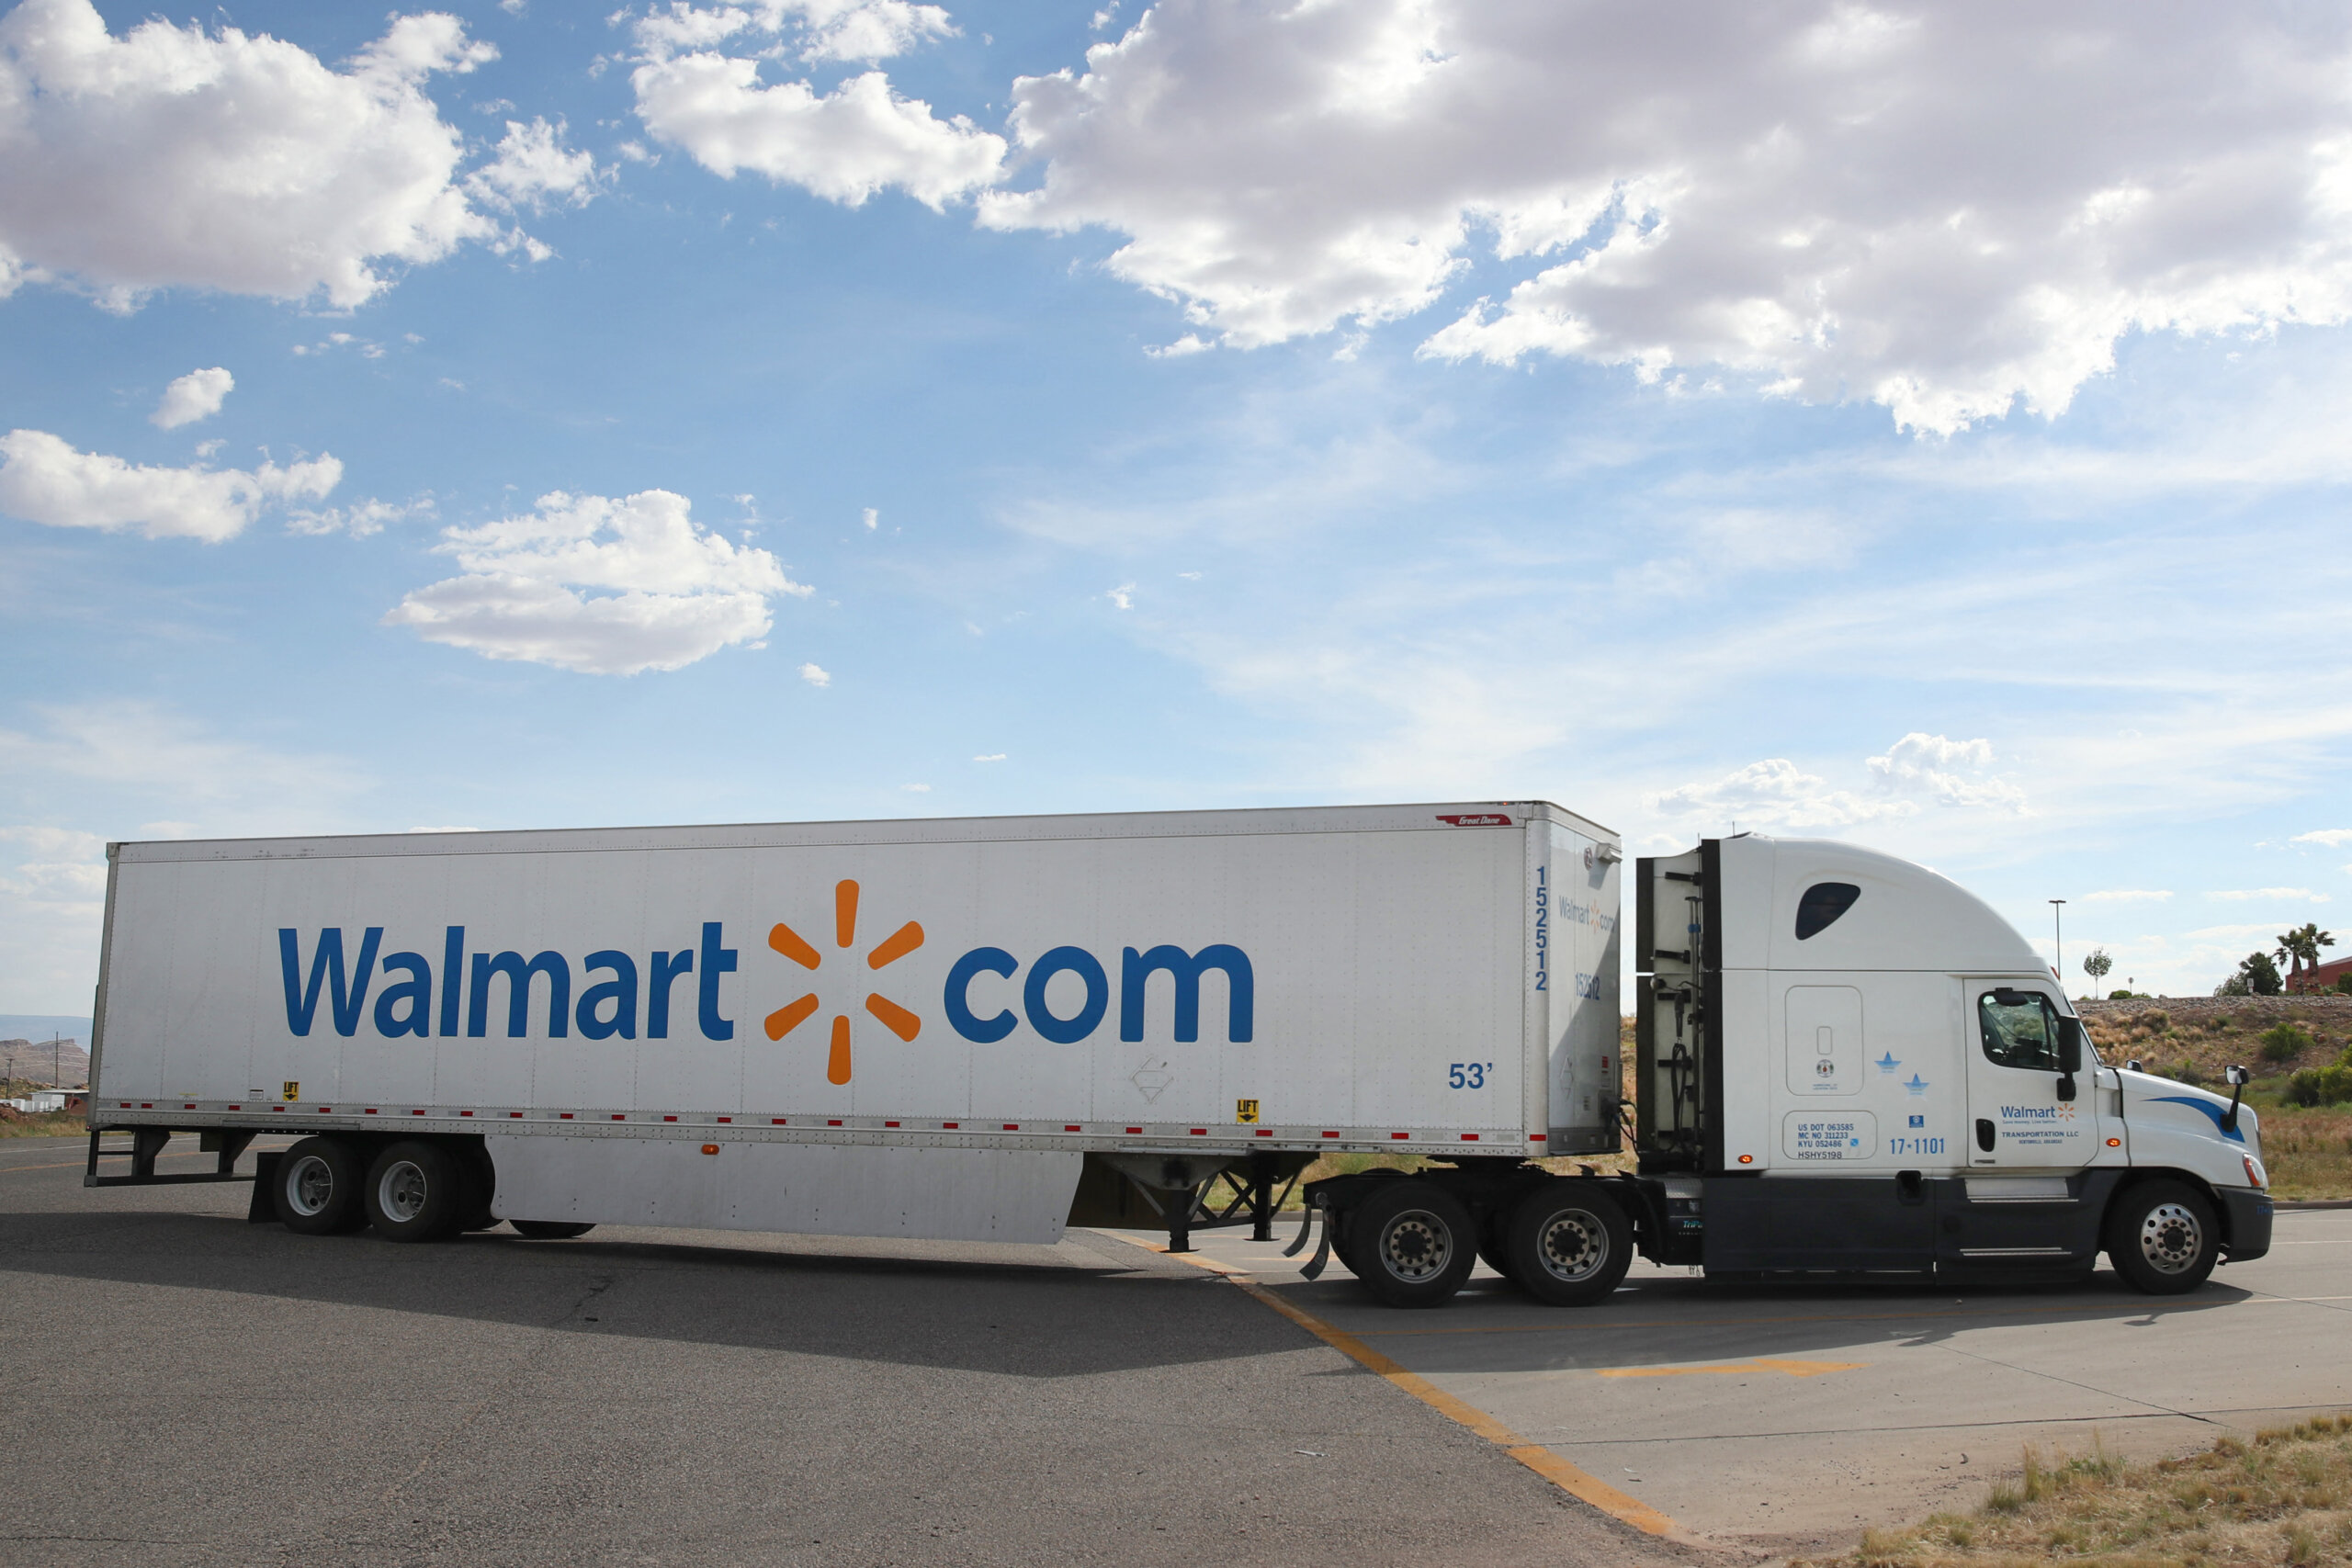 Walmart grows its online grocery distribution footprint by starting fully driverless deliveries of groceries using autonomous vehicles